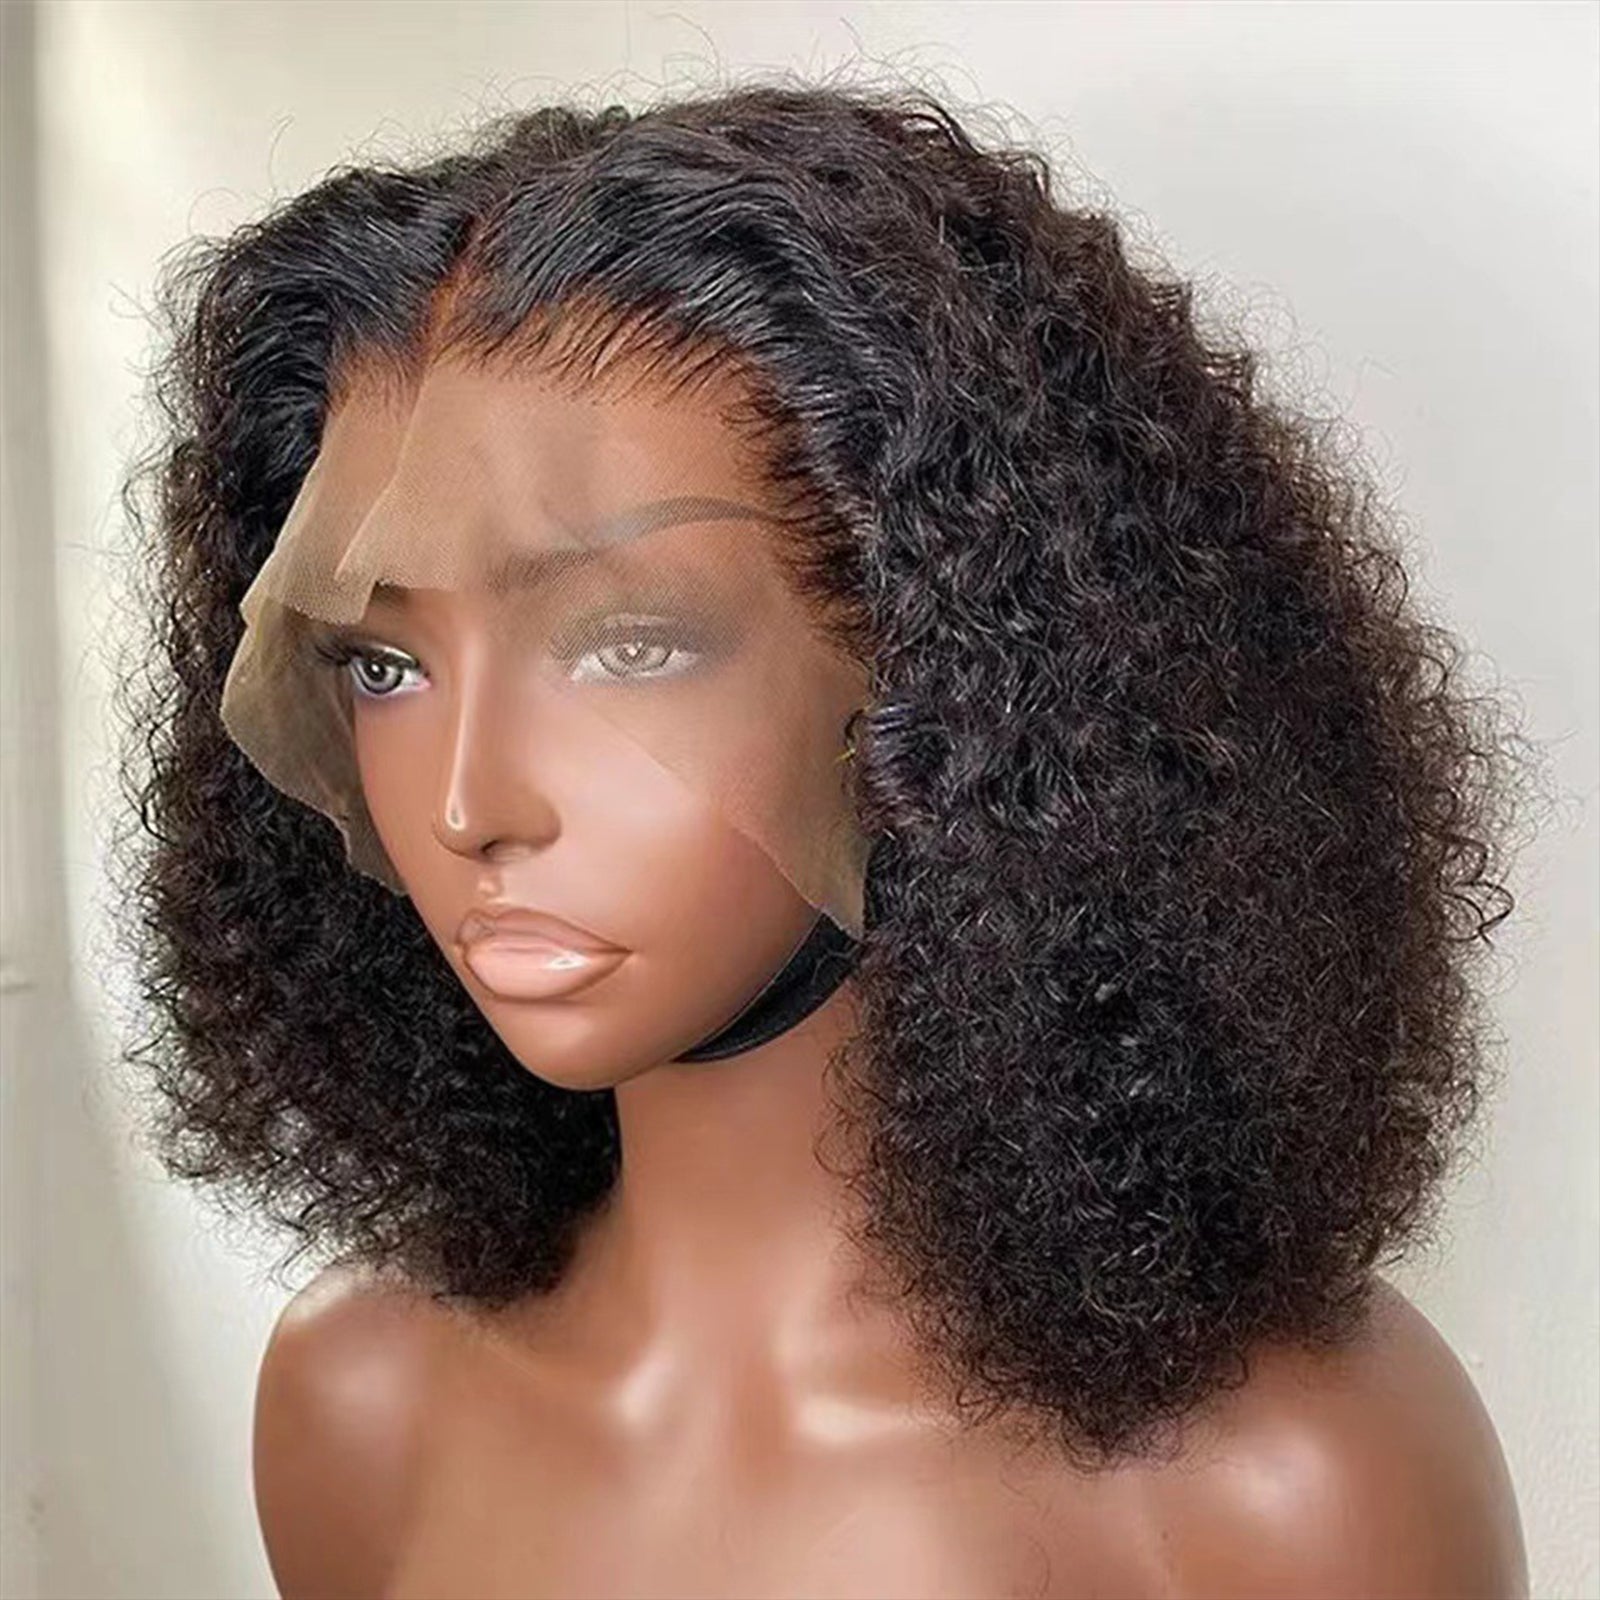 Natural Brazilian Wet and Wavy Human Hair Wig: Pre-Plucked, Curly Lace Frontal, Glueless- Perfect for Black Women!